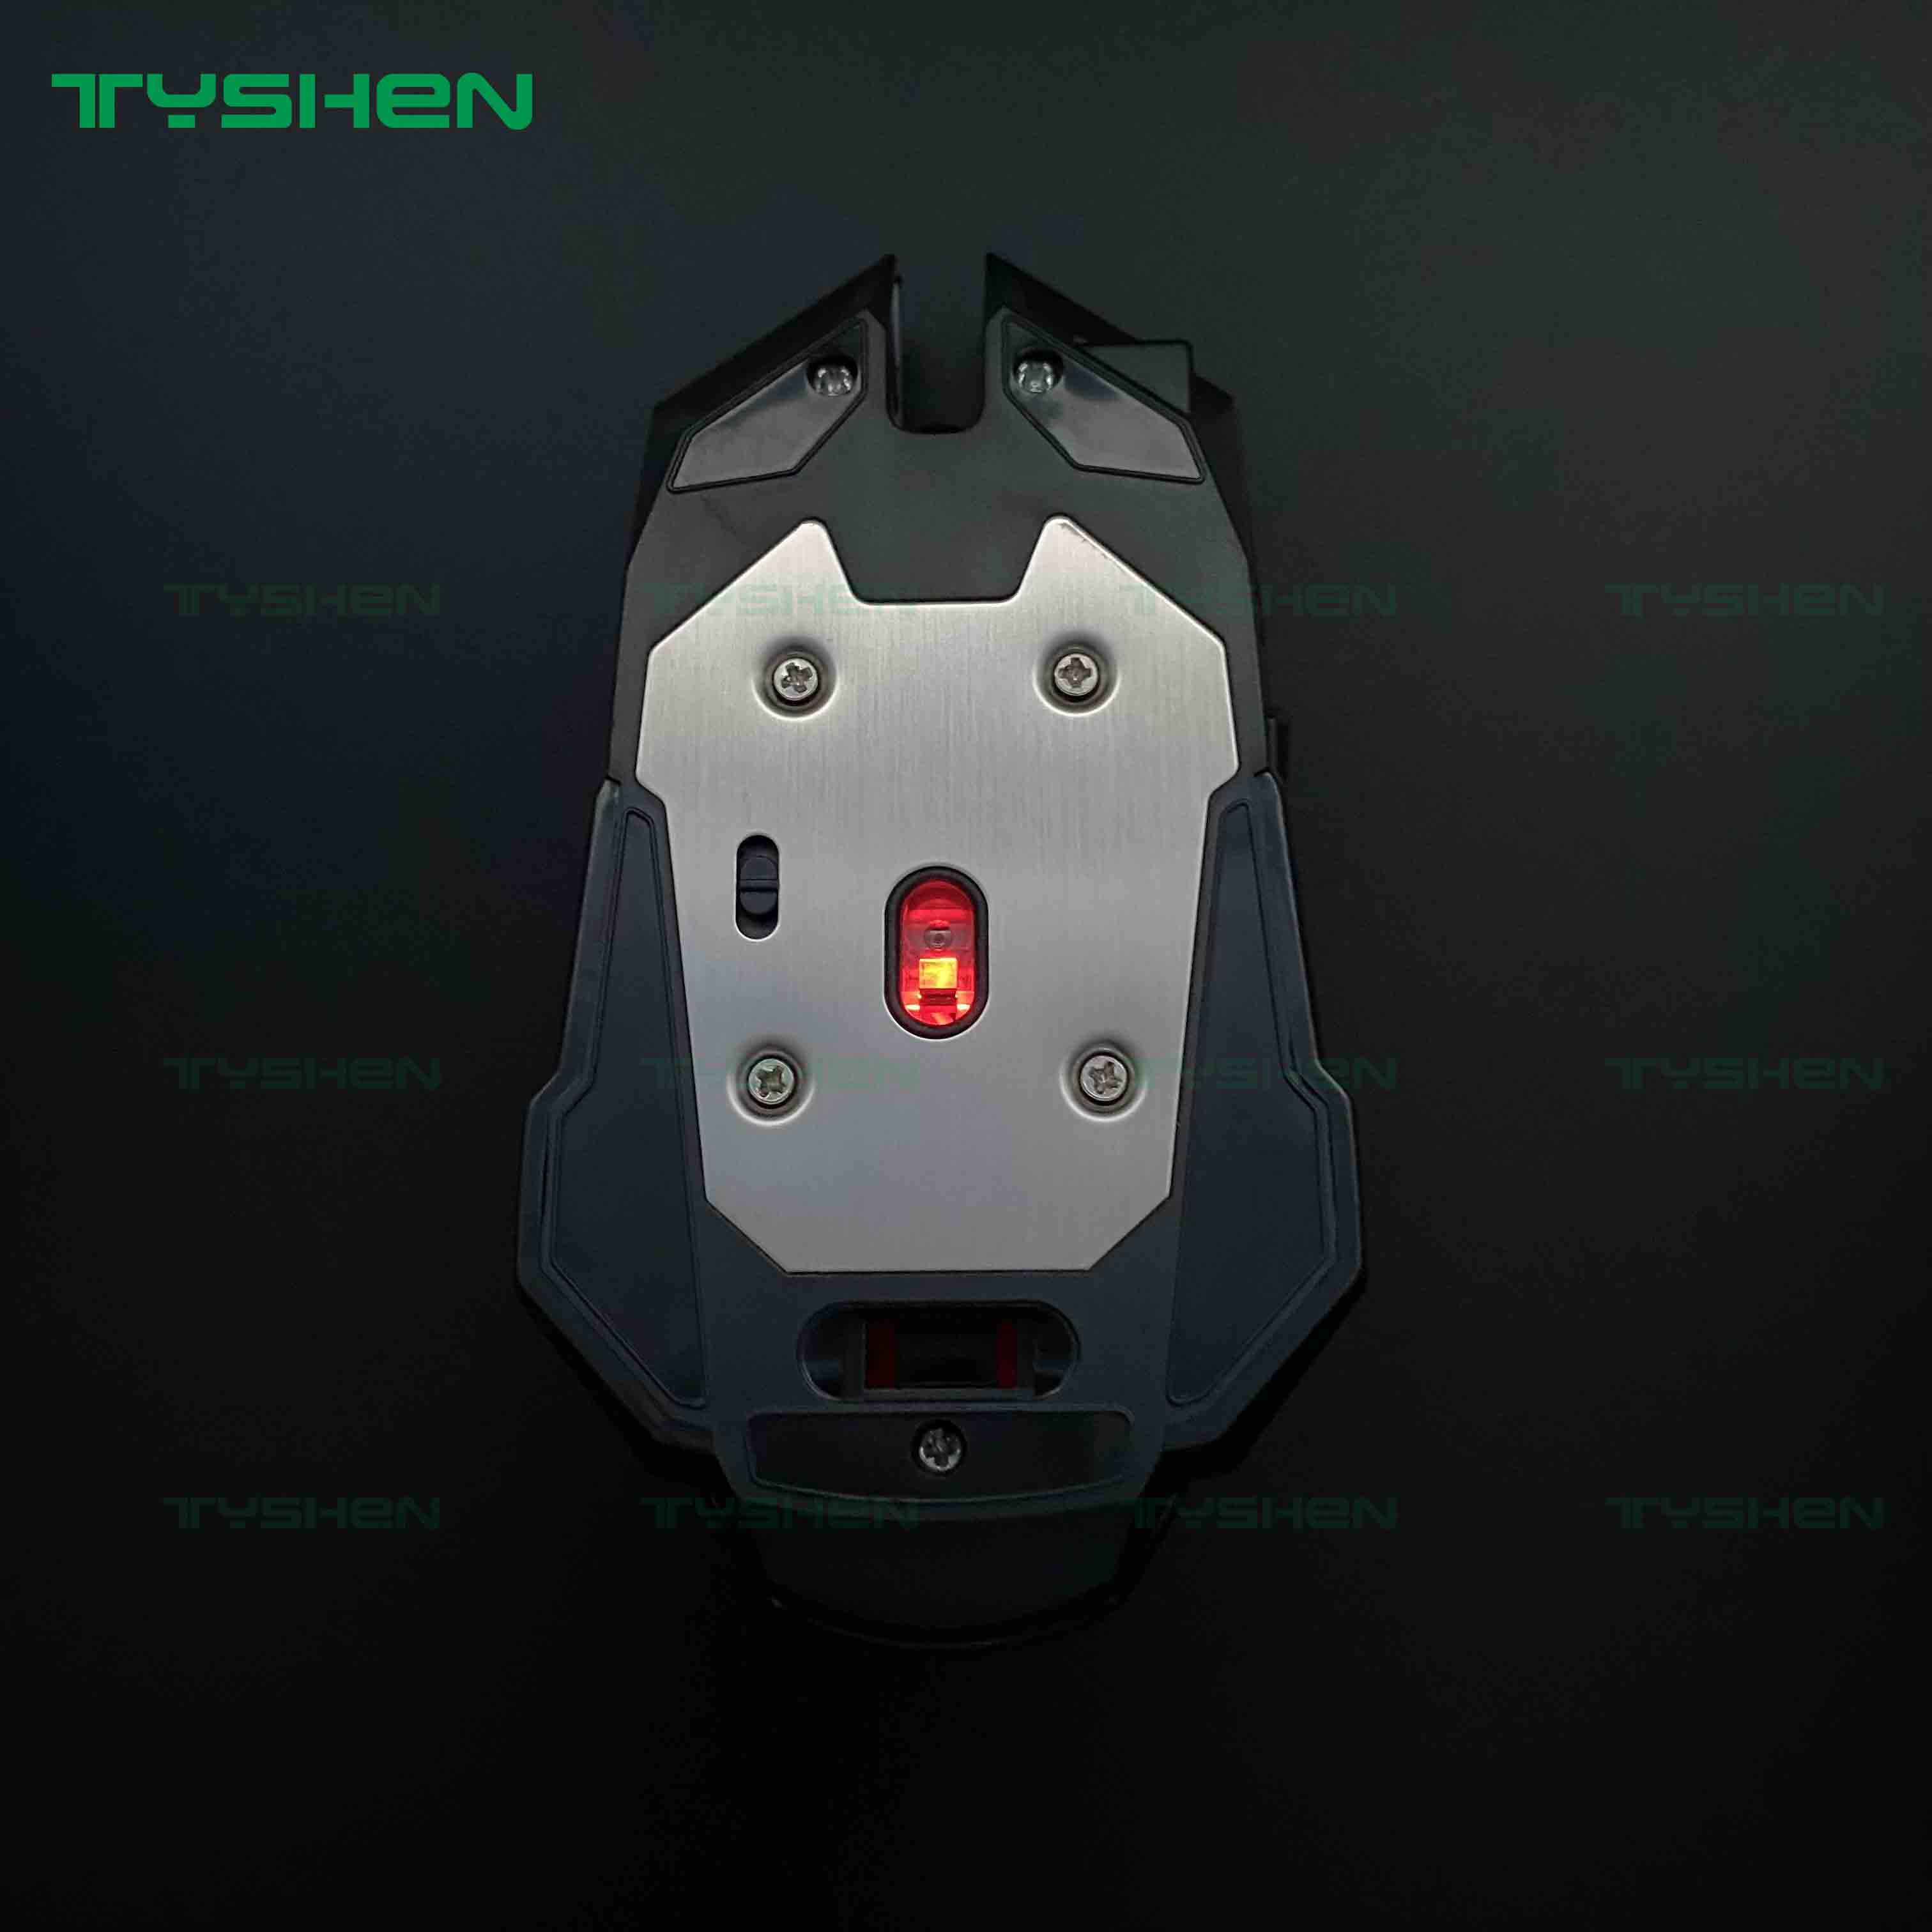 Rechargeable Wireless Gaming Mouse of 6 Buttons,800/1200/1600 DPI